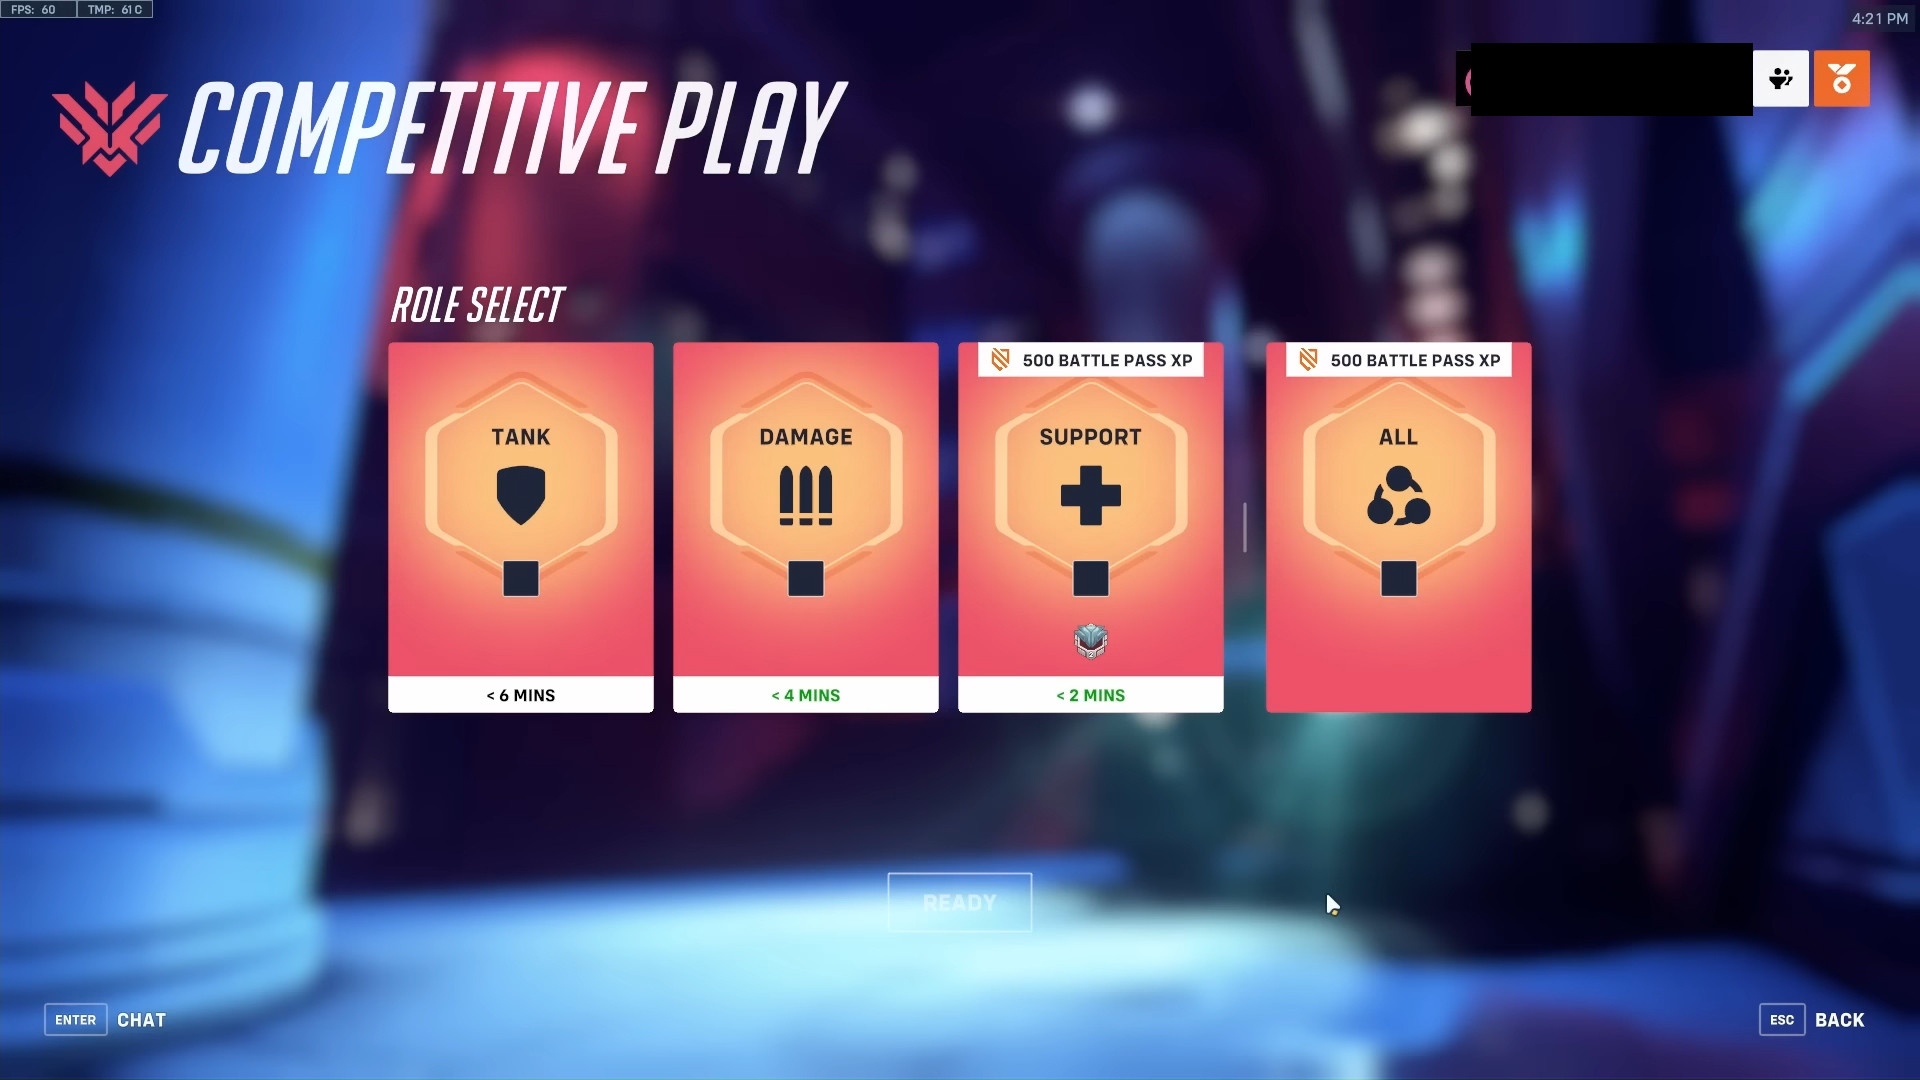 The competitive mode screen.